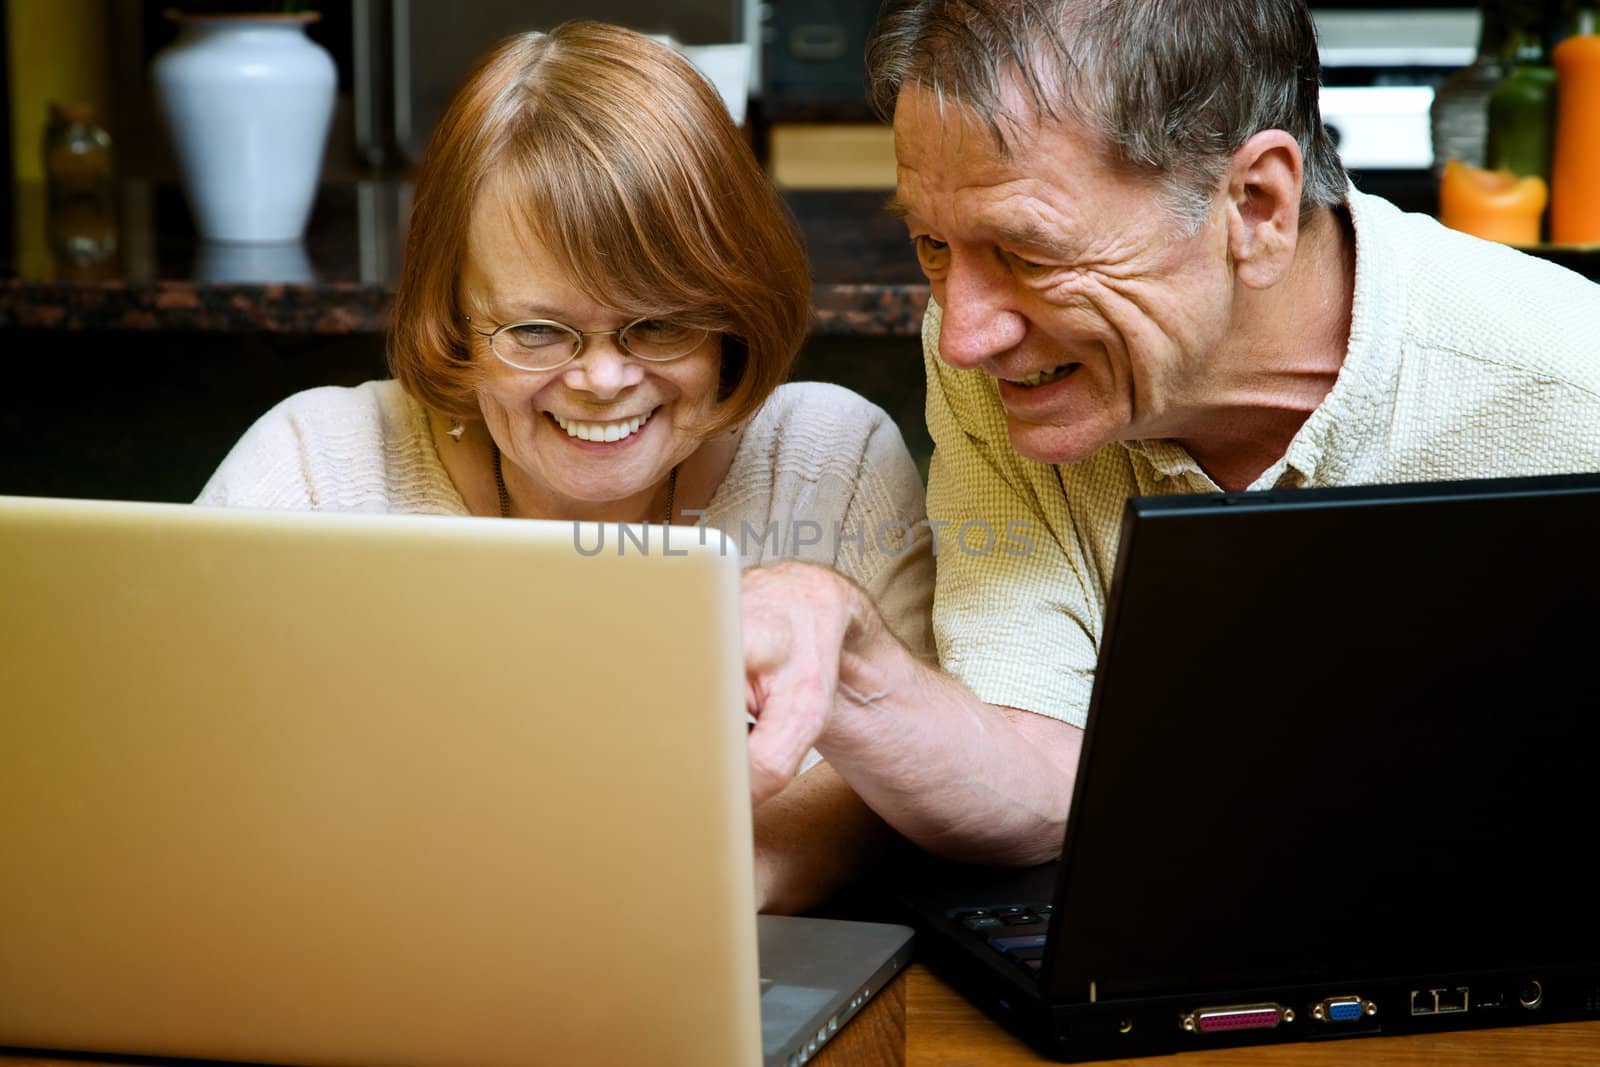 Senior couple using two laptop computers at home